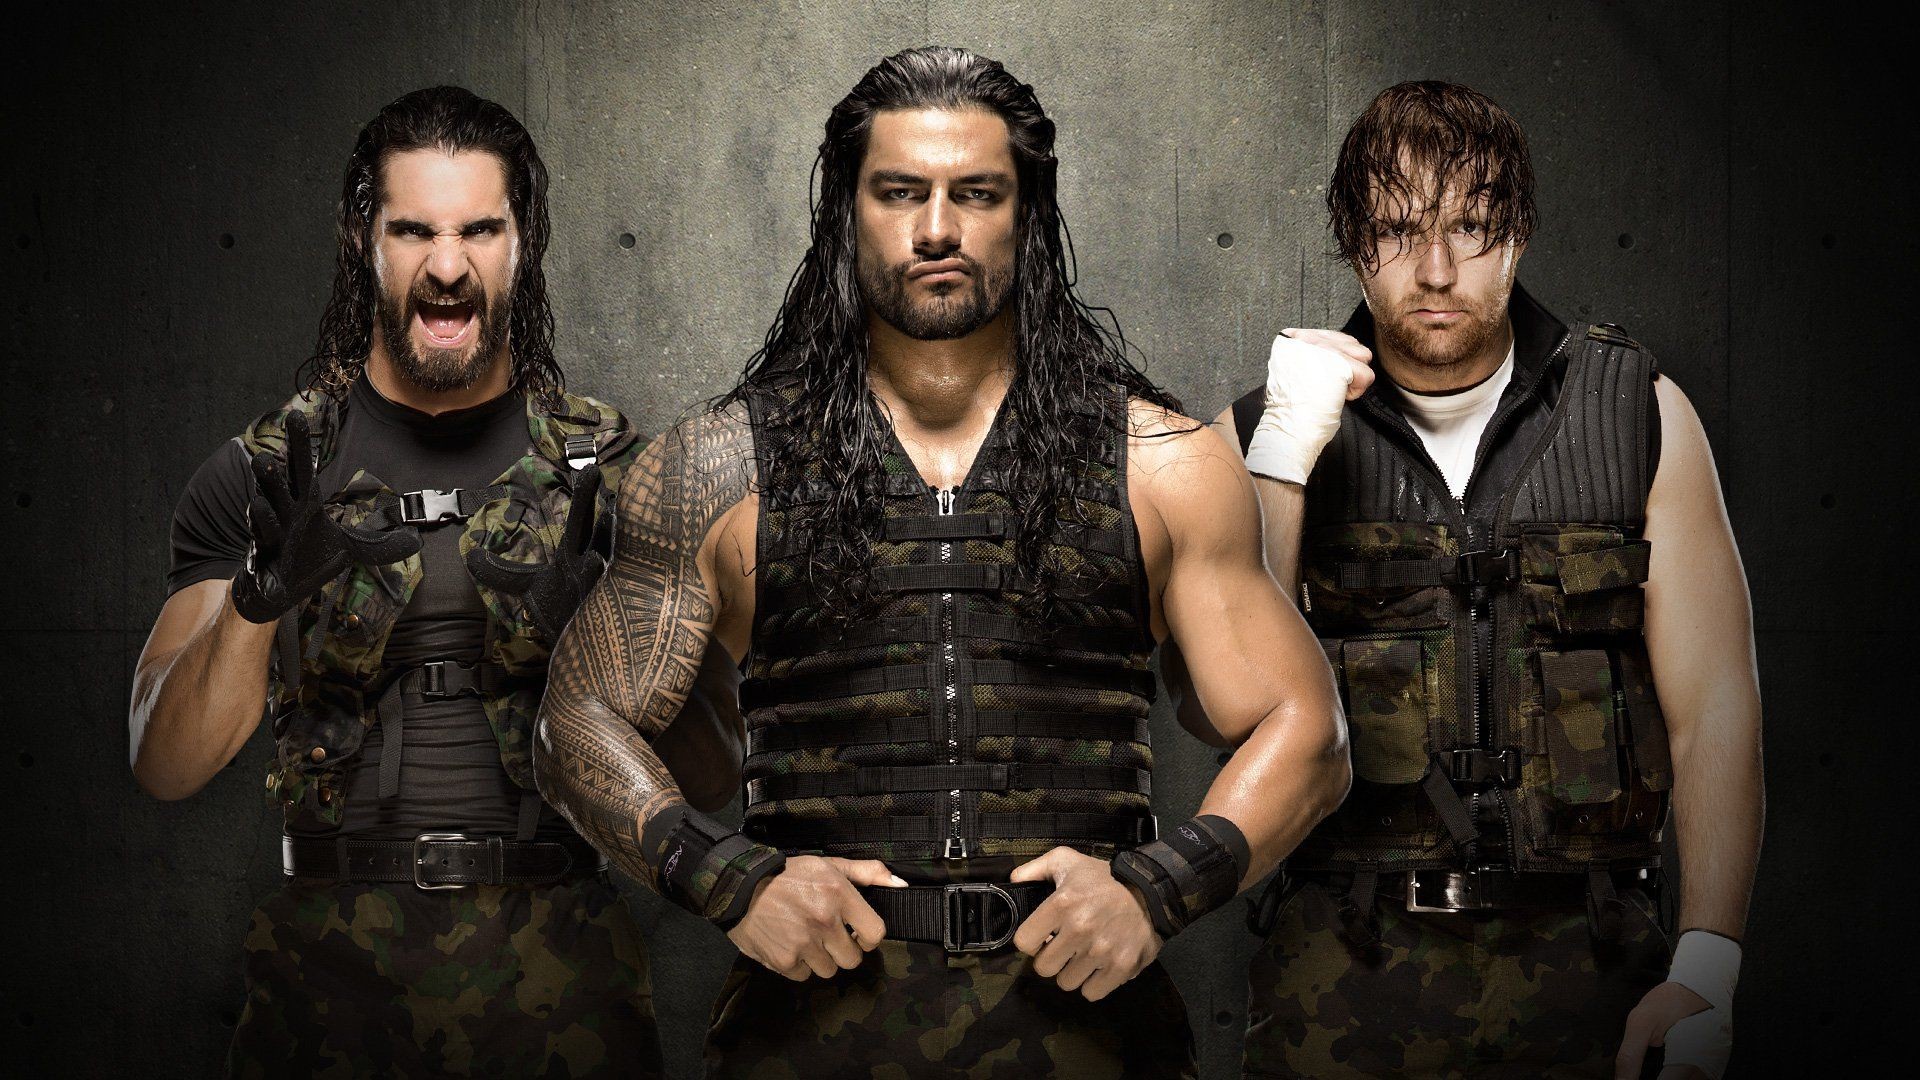 1920x1080 The Shield WWE Wallpaper 2017 | The Shield Wwe 2017 Pictures to Pin on  Pinterest - ThePinsta